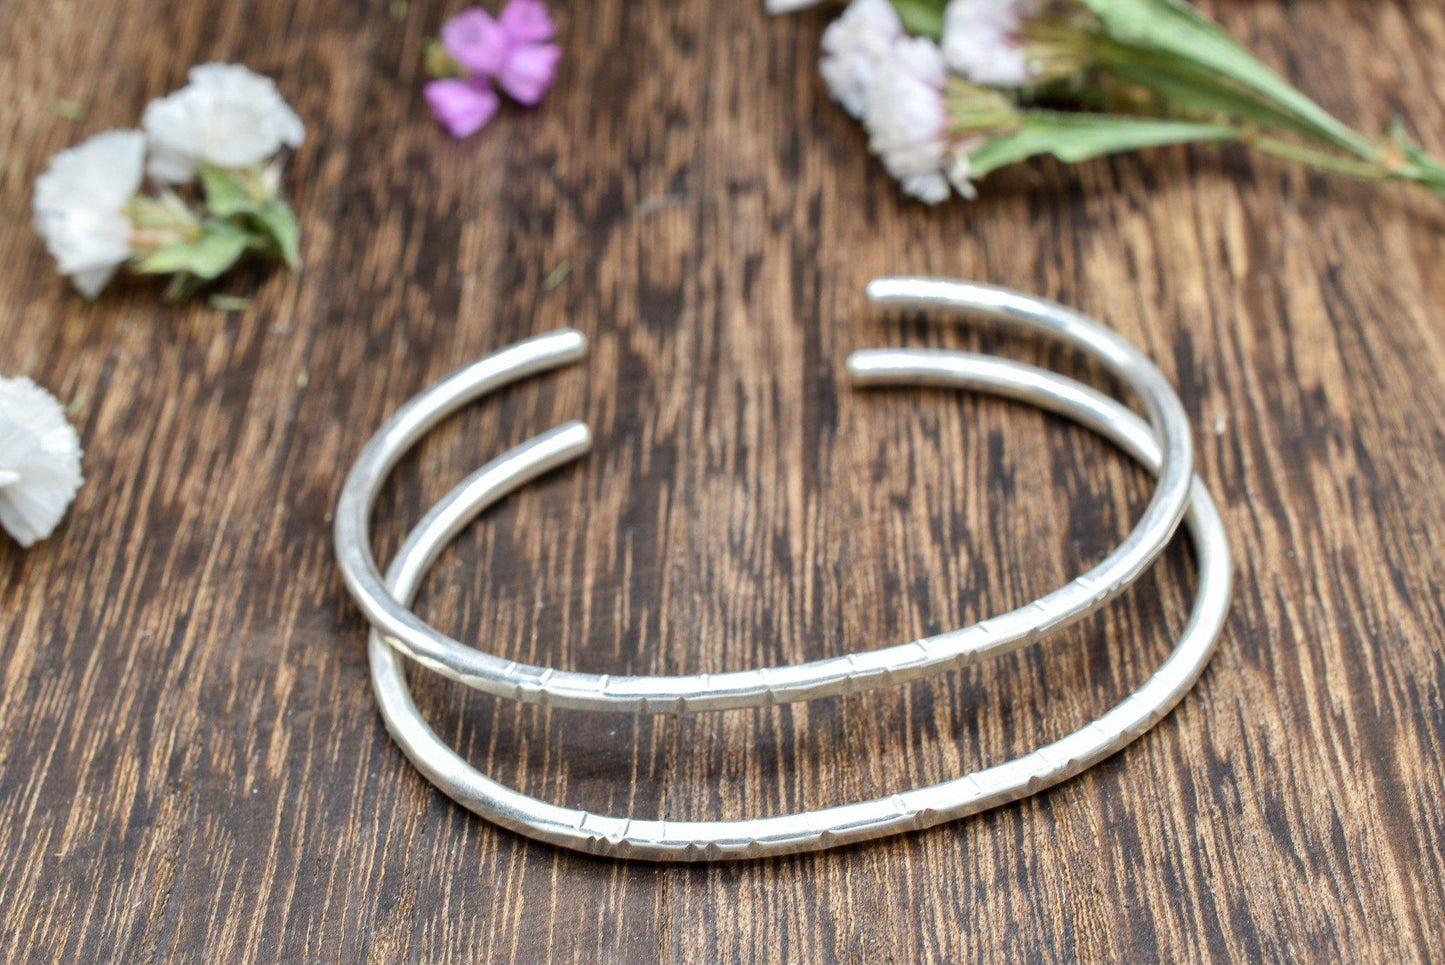 Hammered or Dashed Everyday Cuff Bracelets - Silver